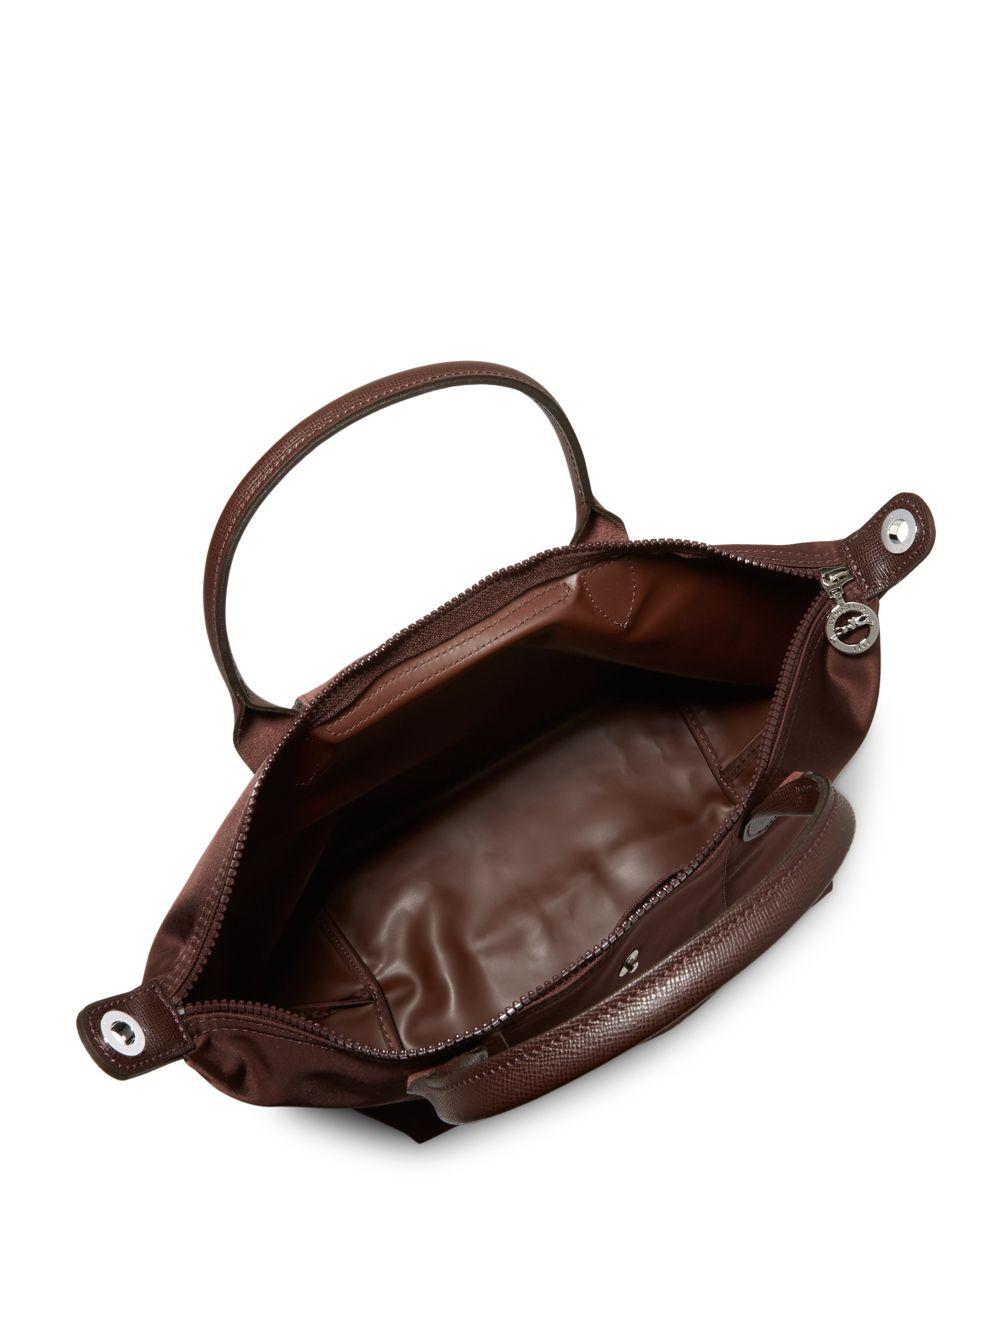 Longchamp Le Pliage Neo Tote Shoulder Bag in Brown | Lyst